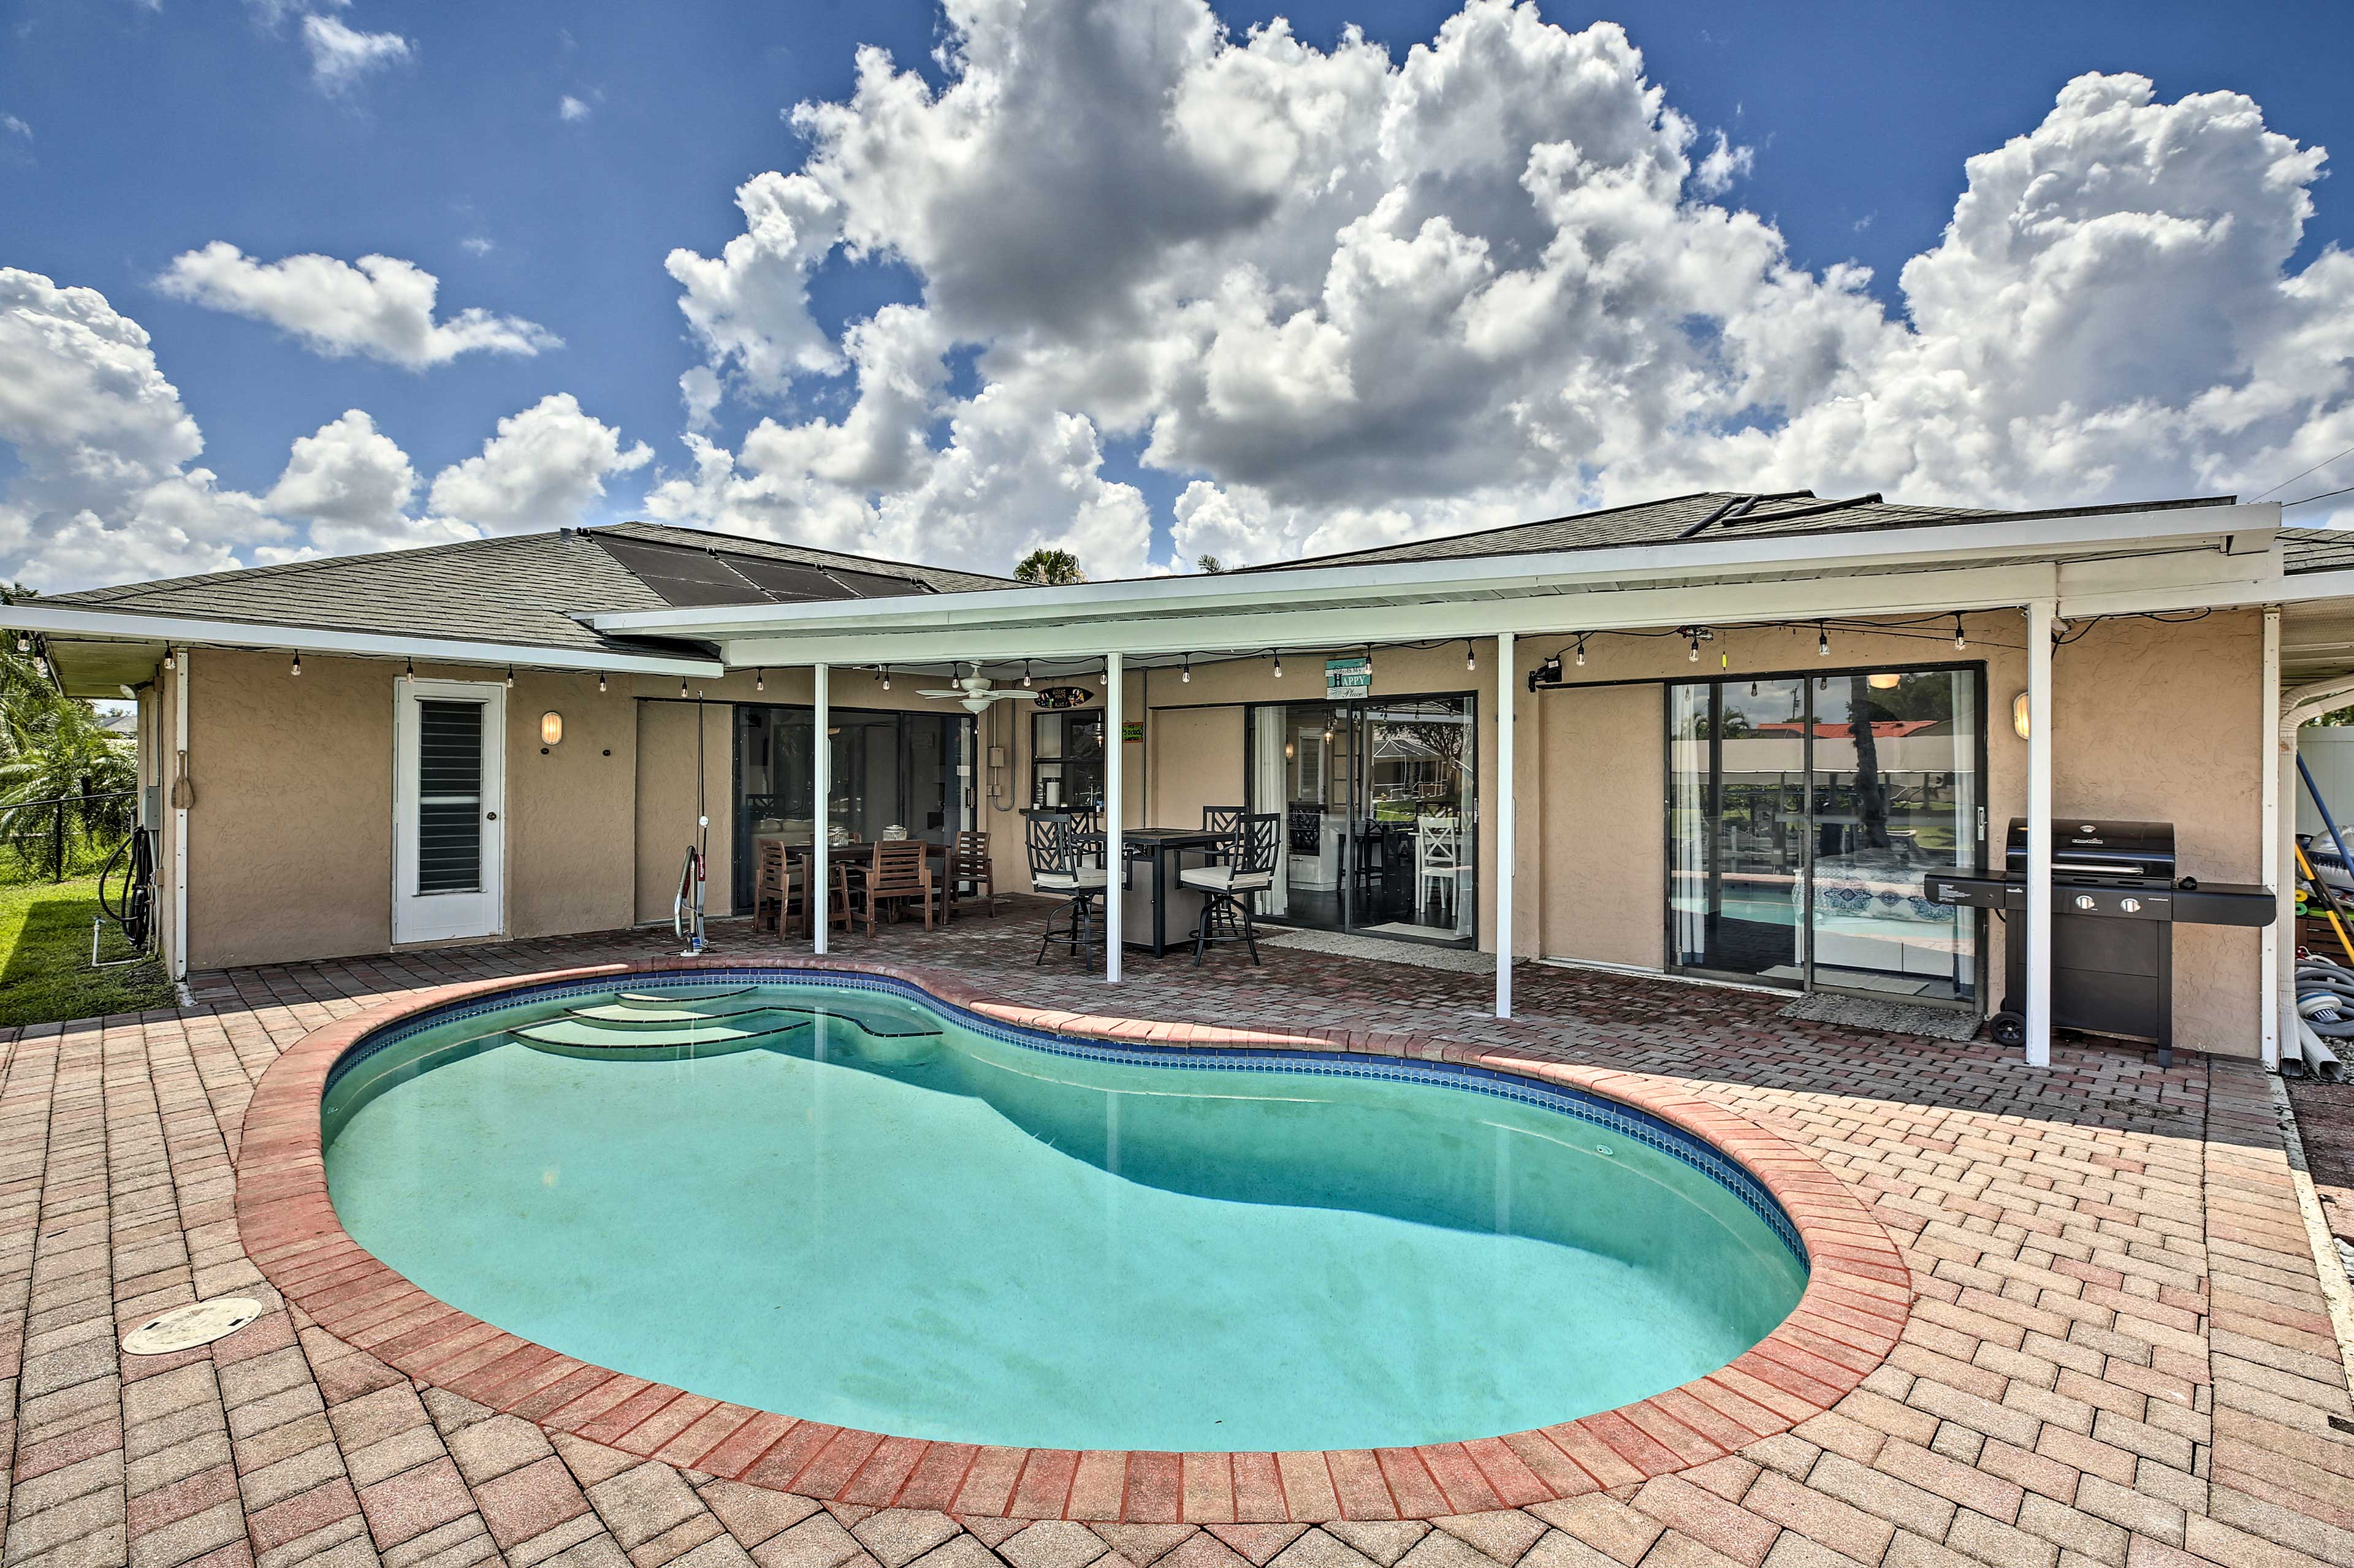 Property Image 1 - Canalfront Oasis with BBQ, Patio, Kayaks & Dock!